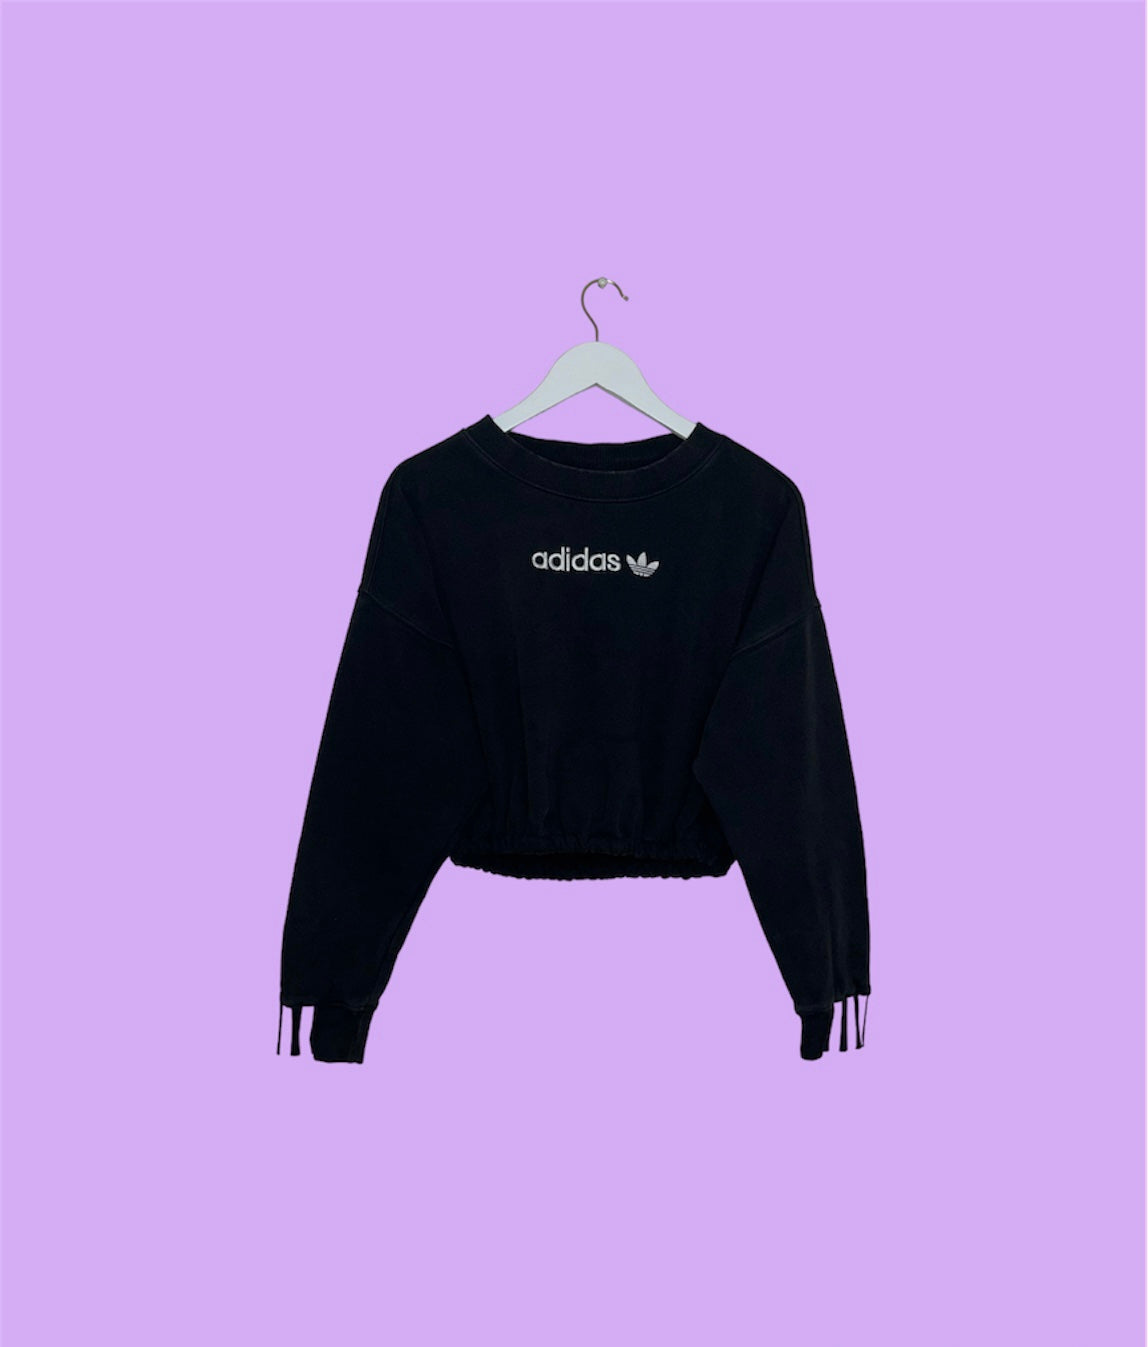 black cropped sweatshirt with white adidas logo shown on a lilac background